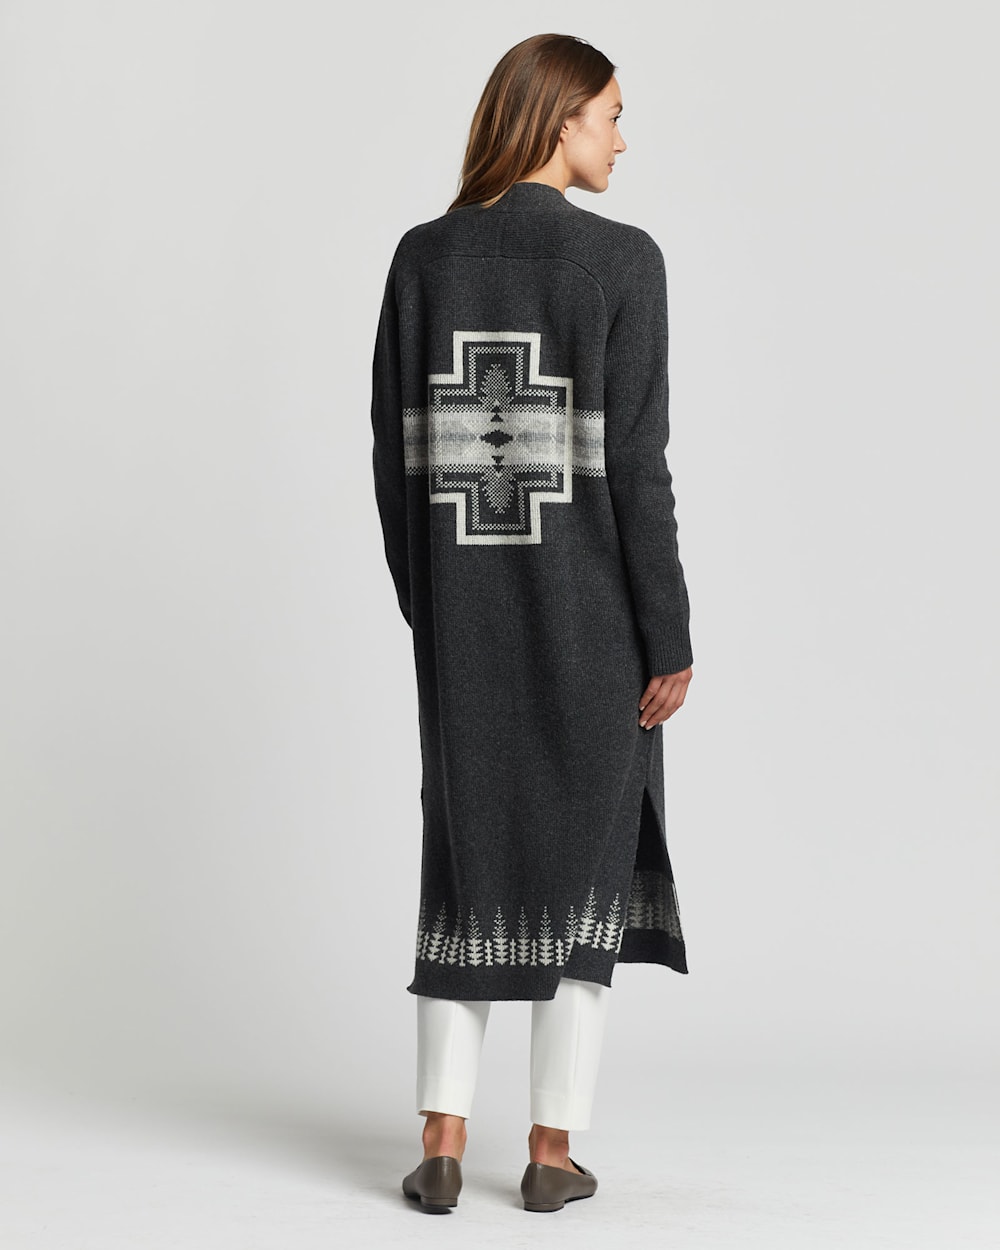 ALTERNATE VIEW OF WOMEN'S LAMBSWOOL DUSTER CARDIGAN IN CHARCOAL MULTI image number 3